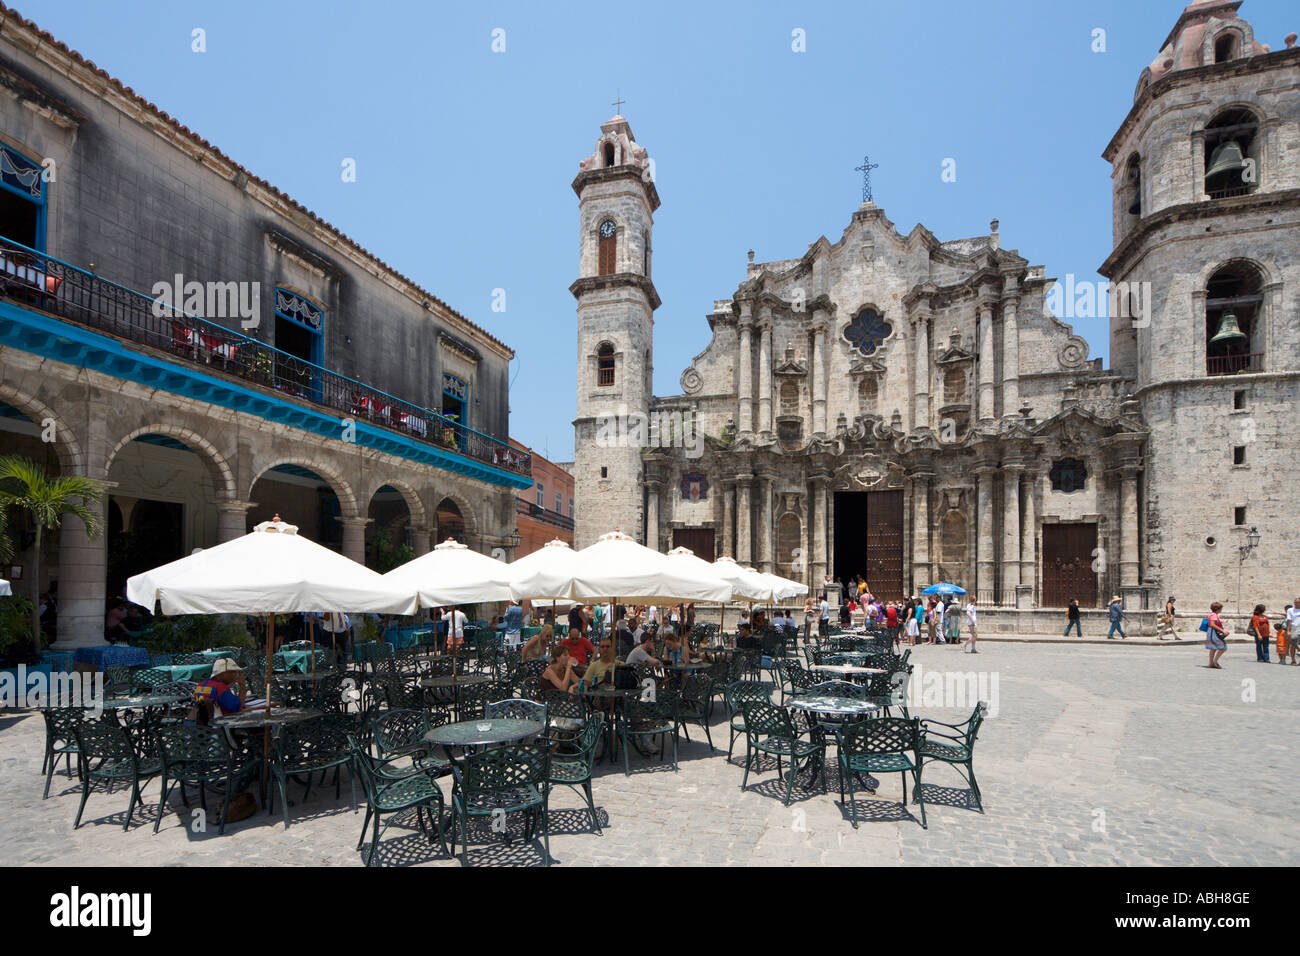 Street cafe in front of the Cathedral, Plaza de la Catedral, Habana Vieja ,Havana, Cuba Stock Photo